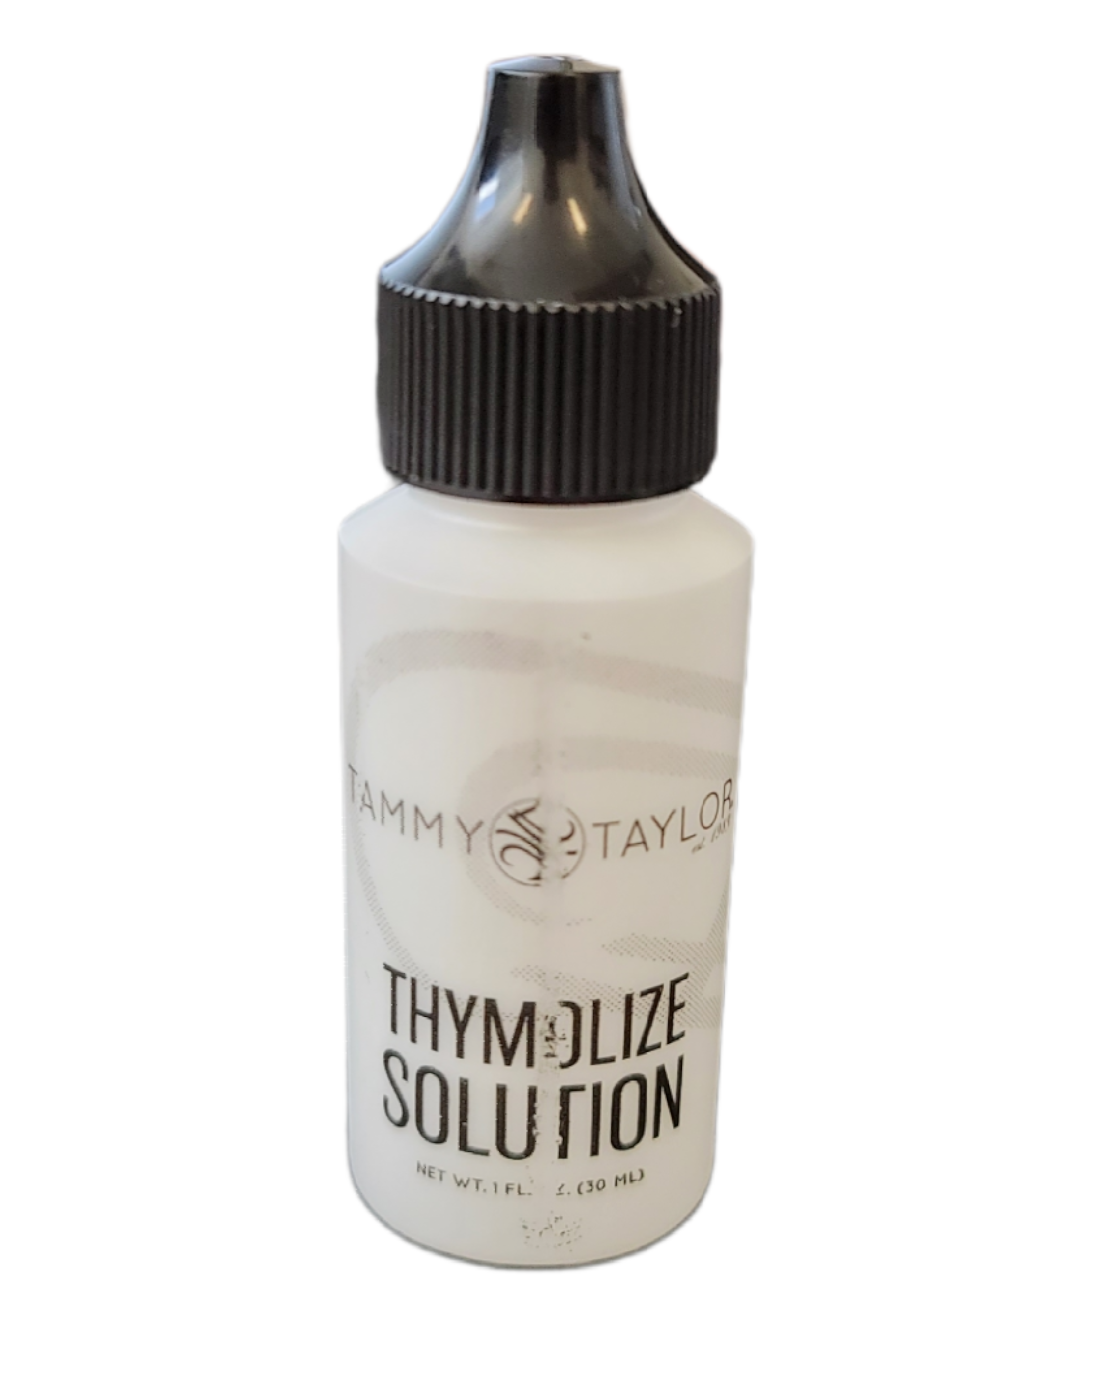 Tammy Taylor Thymolize Solution Prevents Fungus On Fingernails And Toe 1oz/30ml